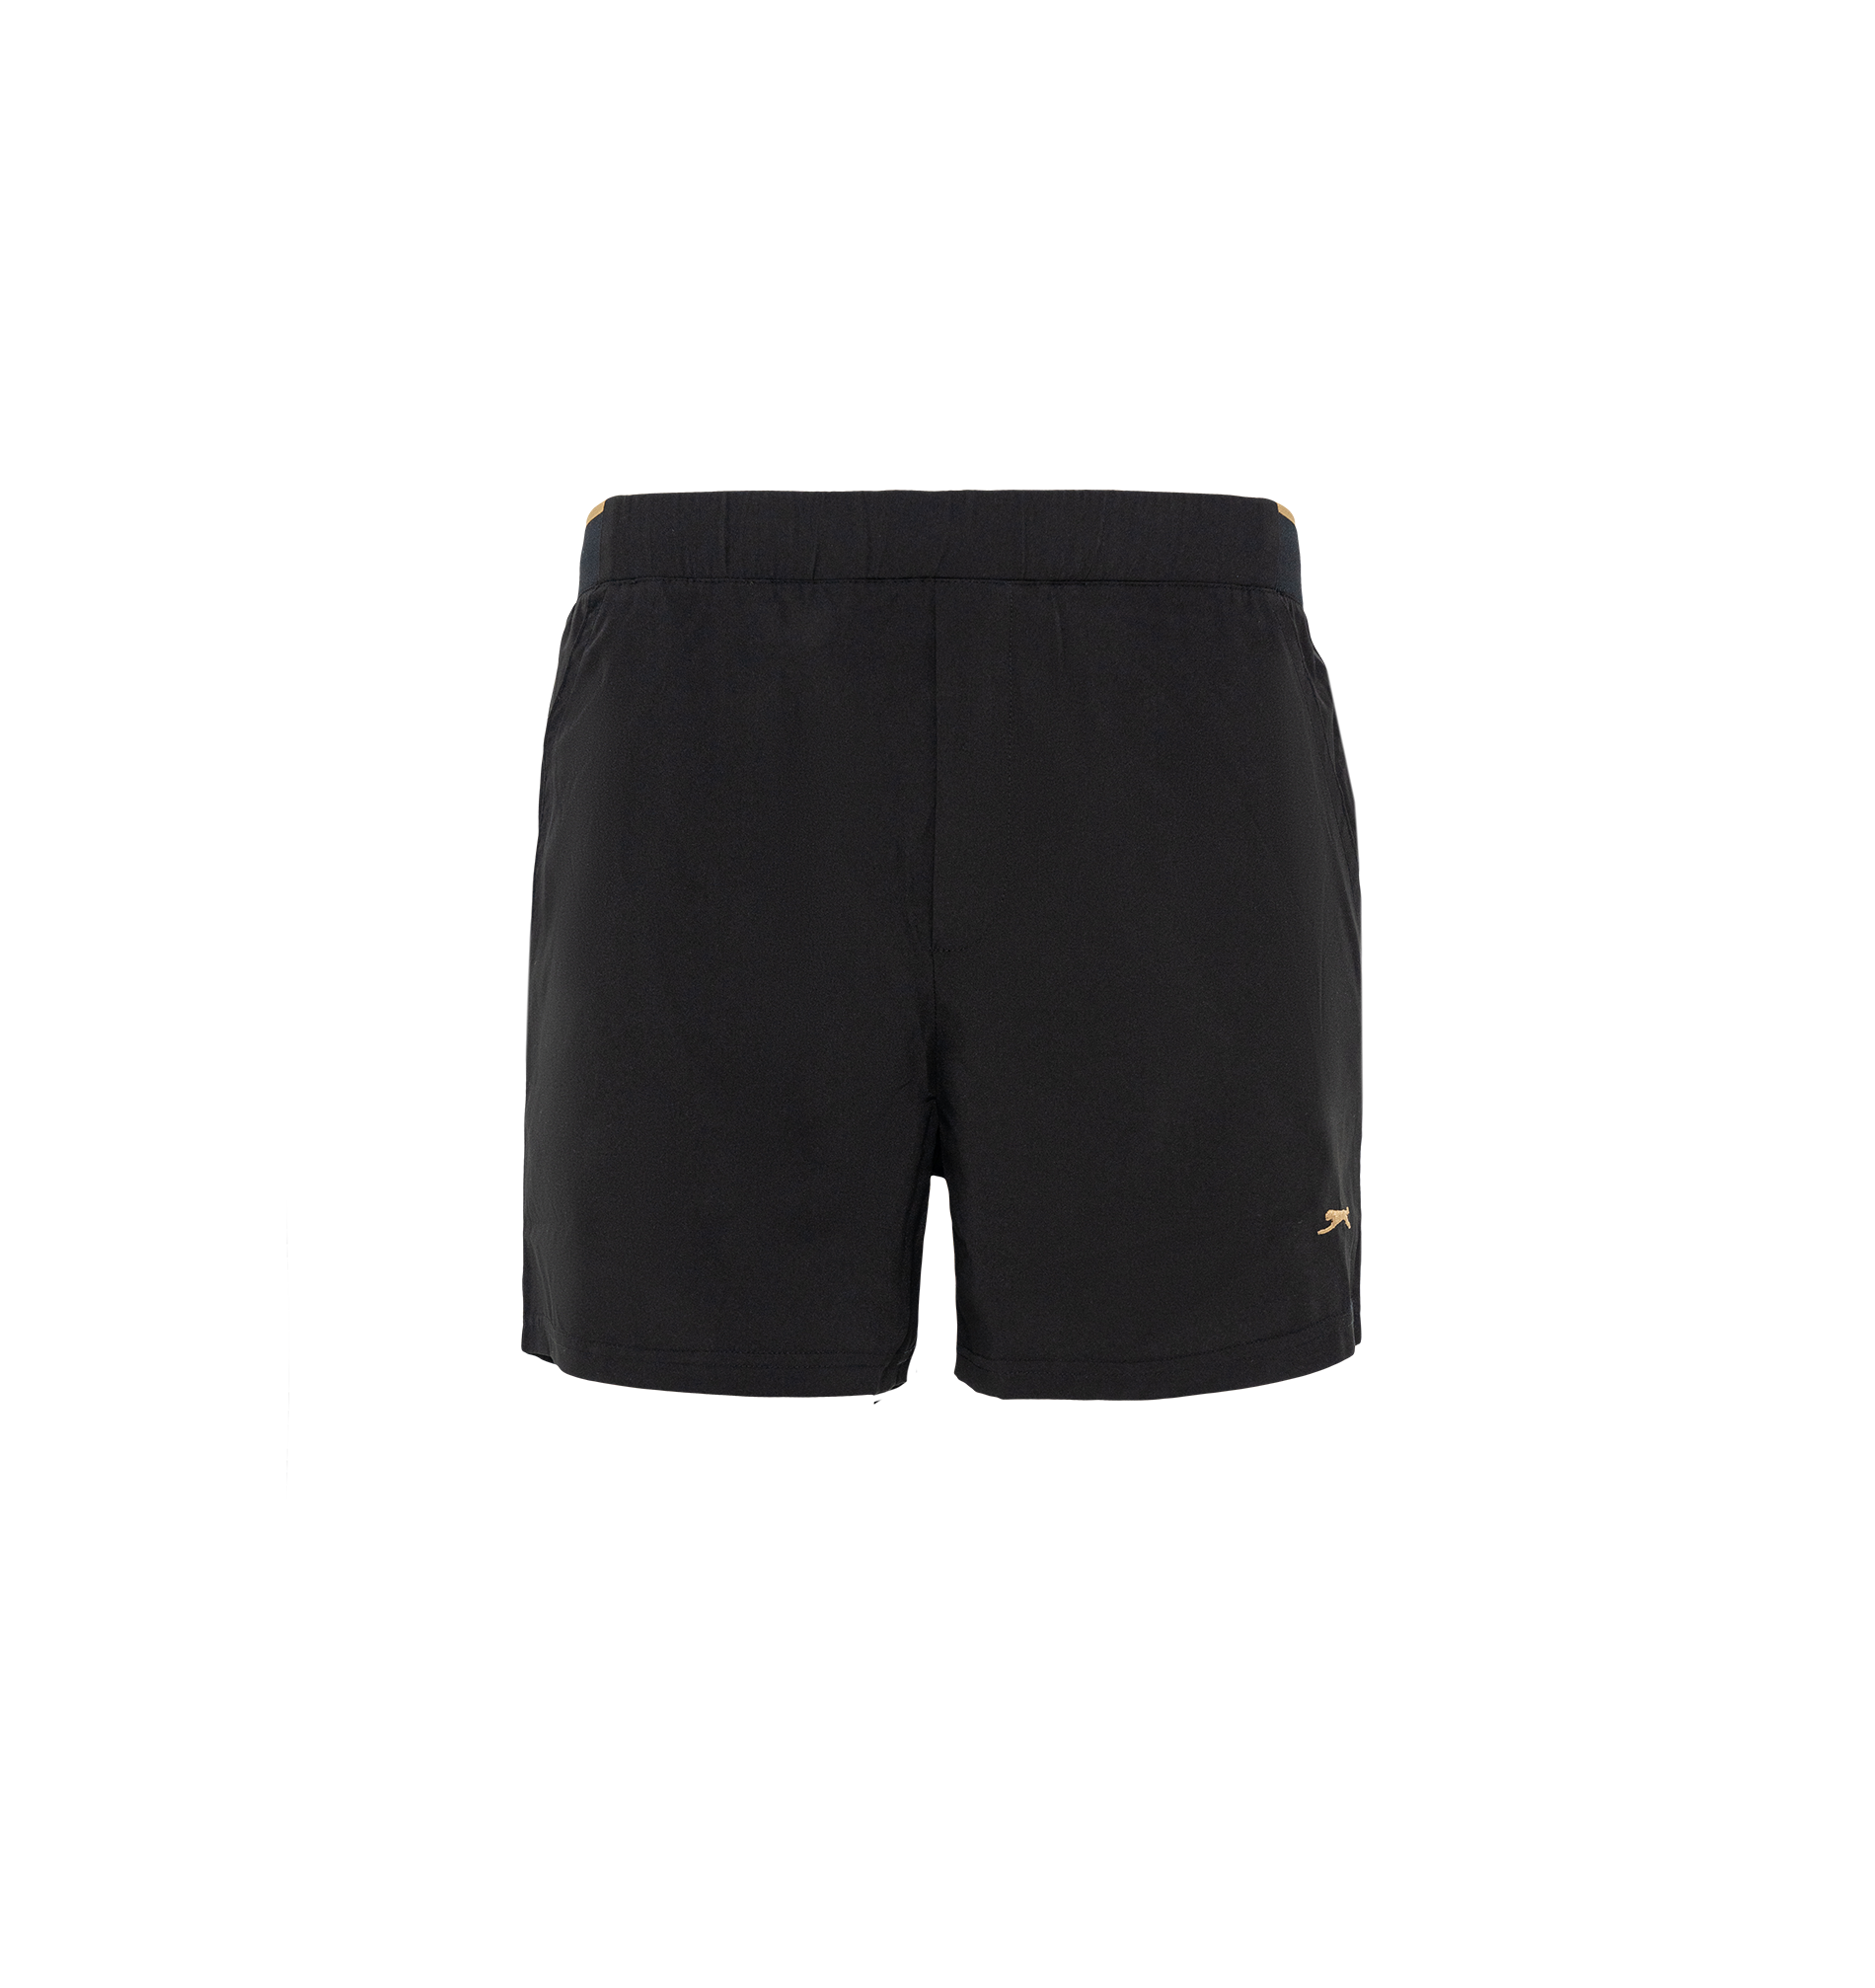 TEO TRACK SHORTS - PANTHER BLACK